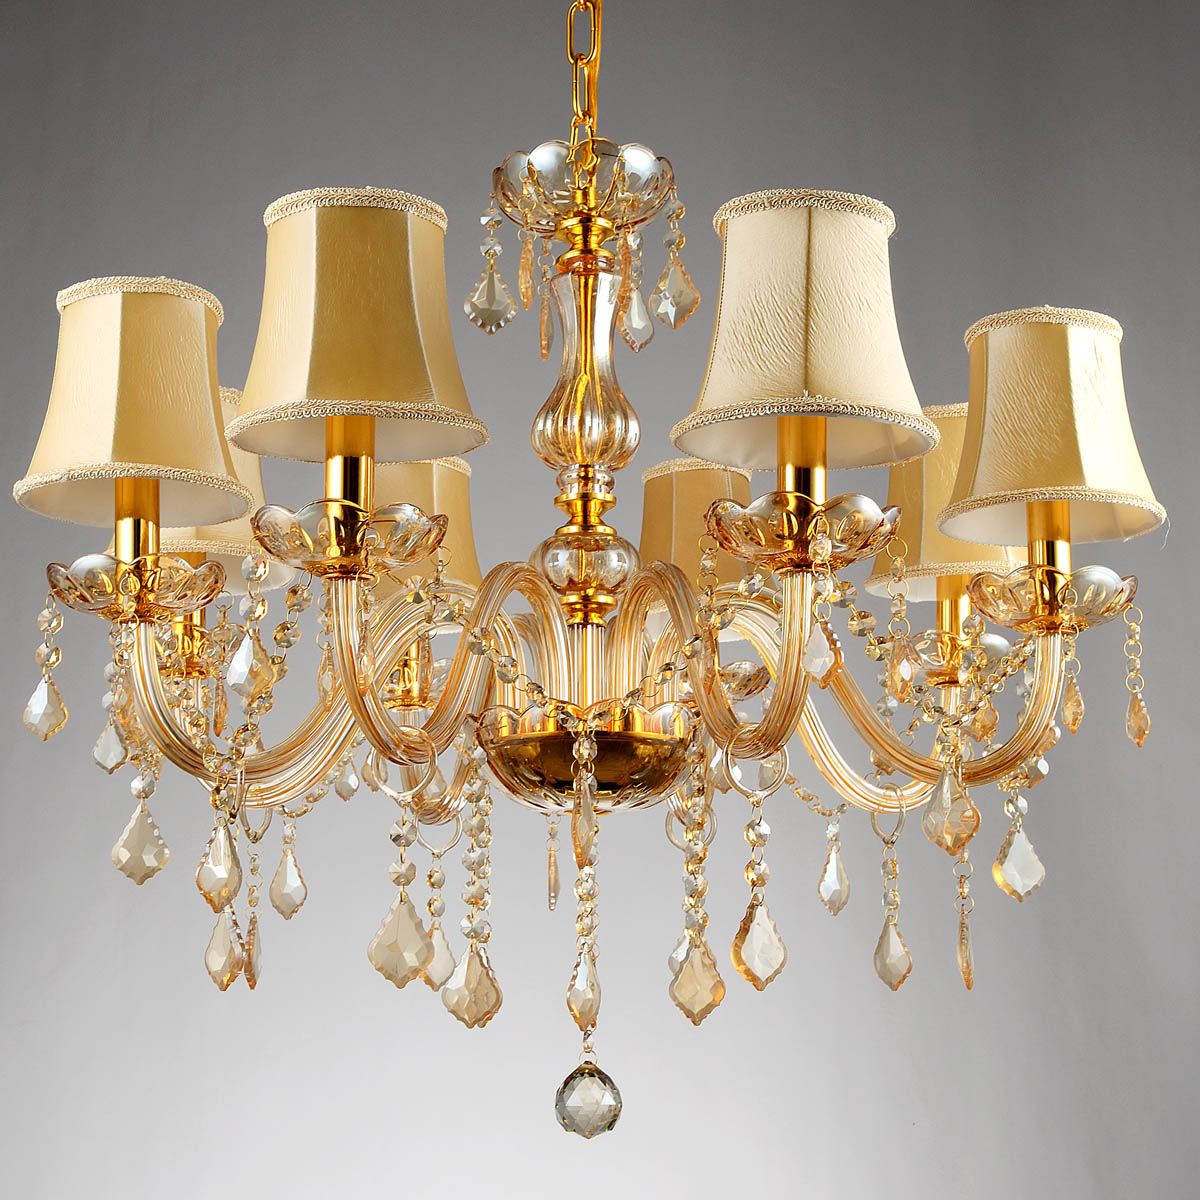 Free Ship 6/8 Arms Fashion Crystal Chandelier Lighting Within Preferred Champagne Glass Chandeliers (View 7 of 15)